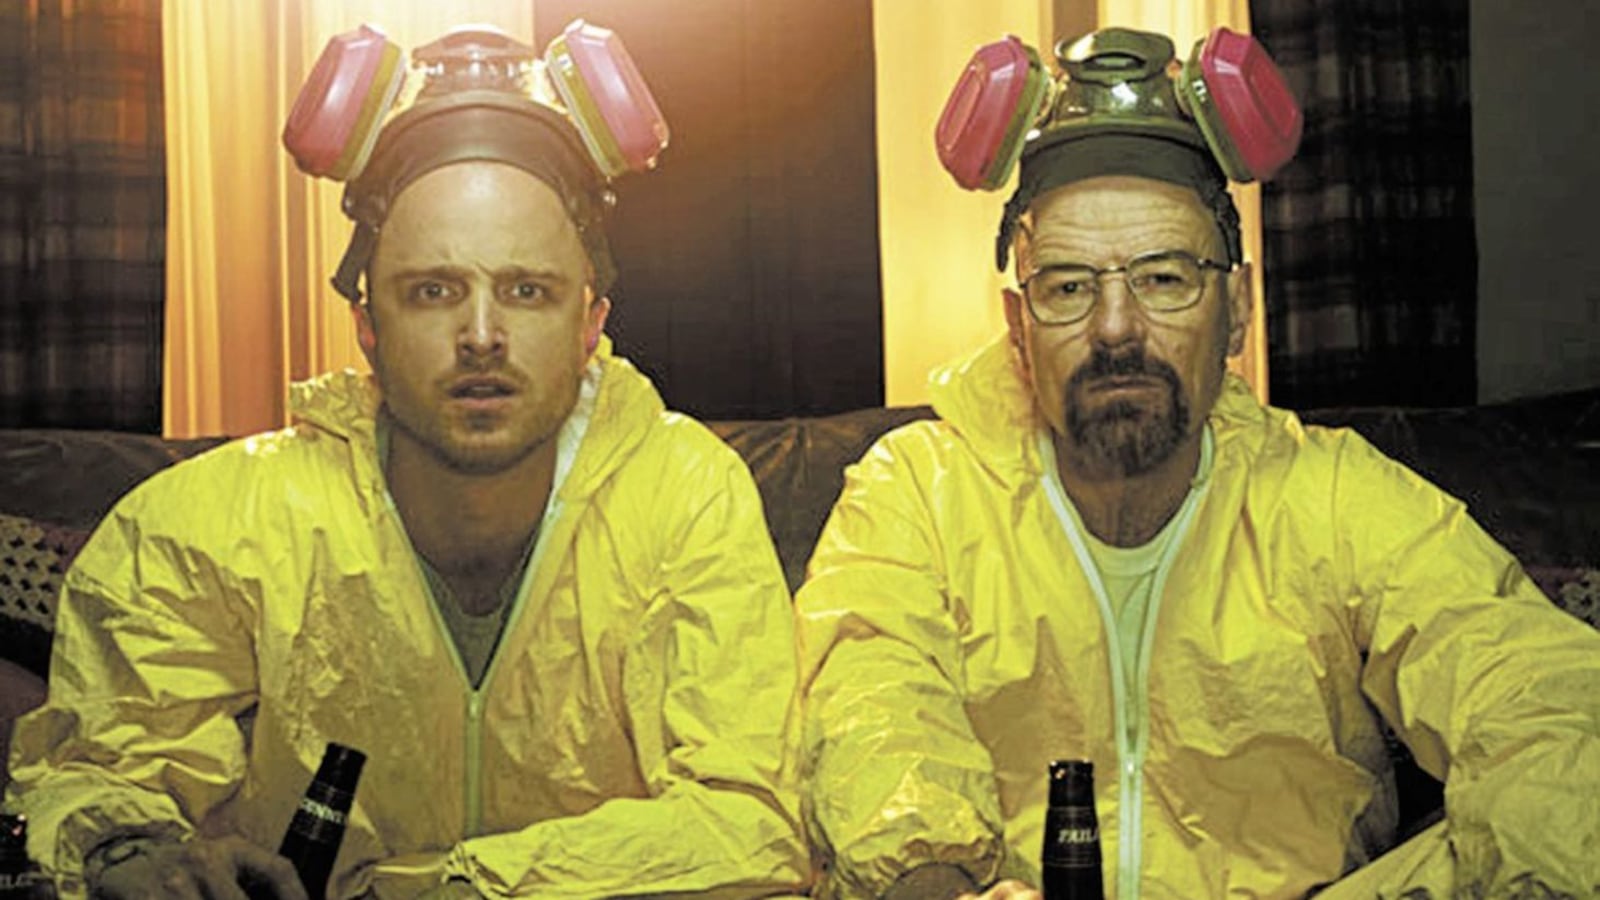 Breaking Bad Star Bryan Cranston Itching To Visit Armagh Roots The Irish News